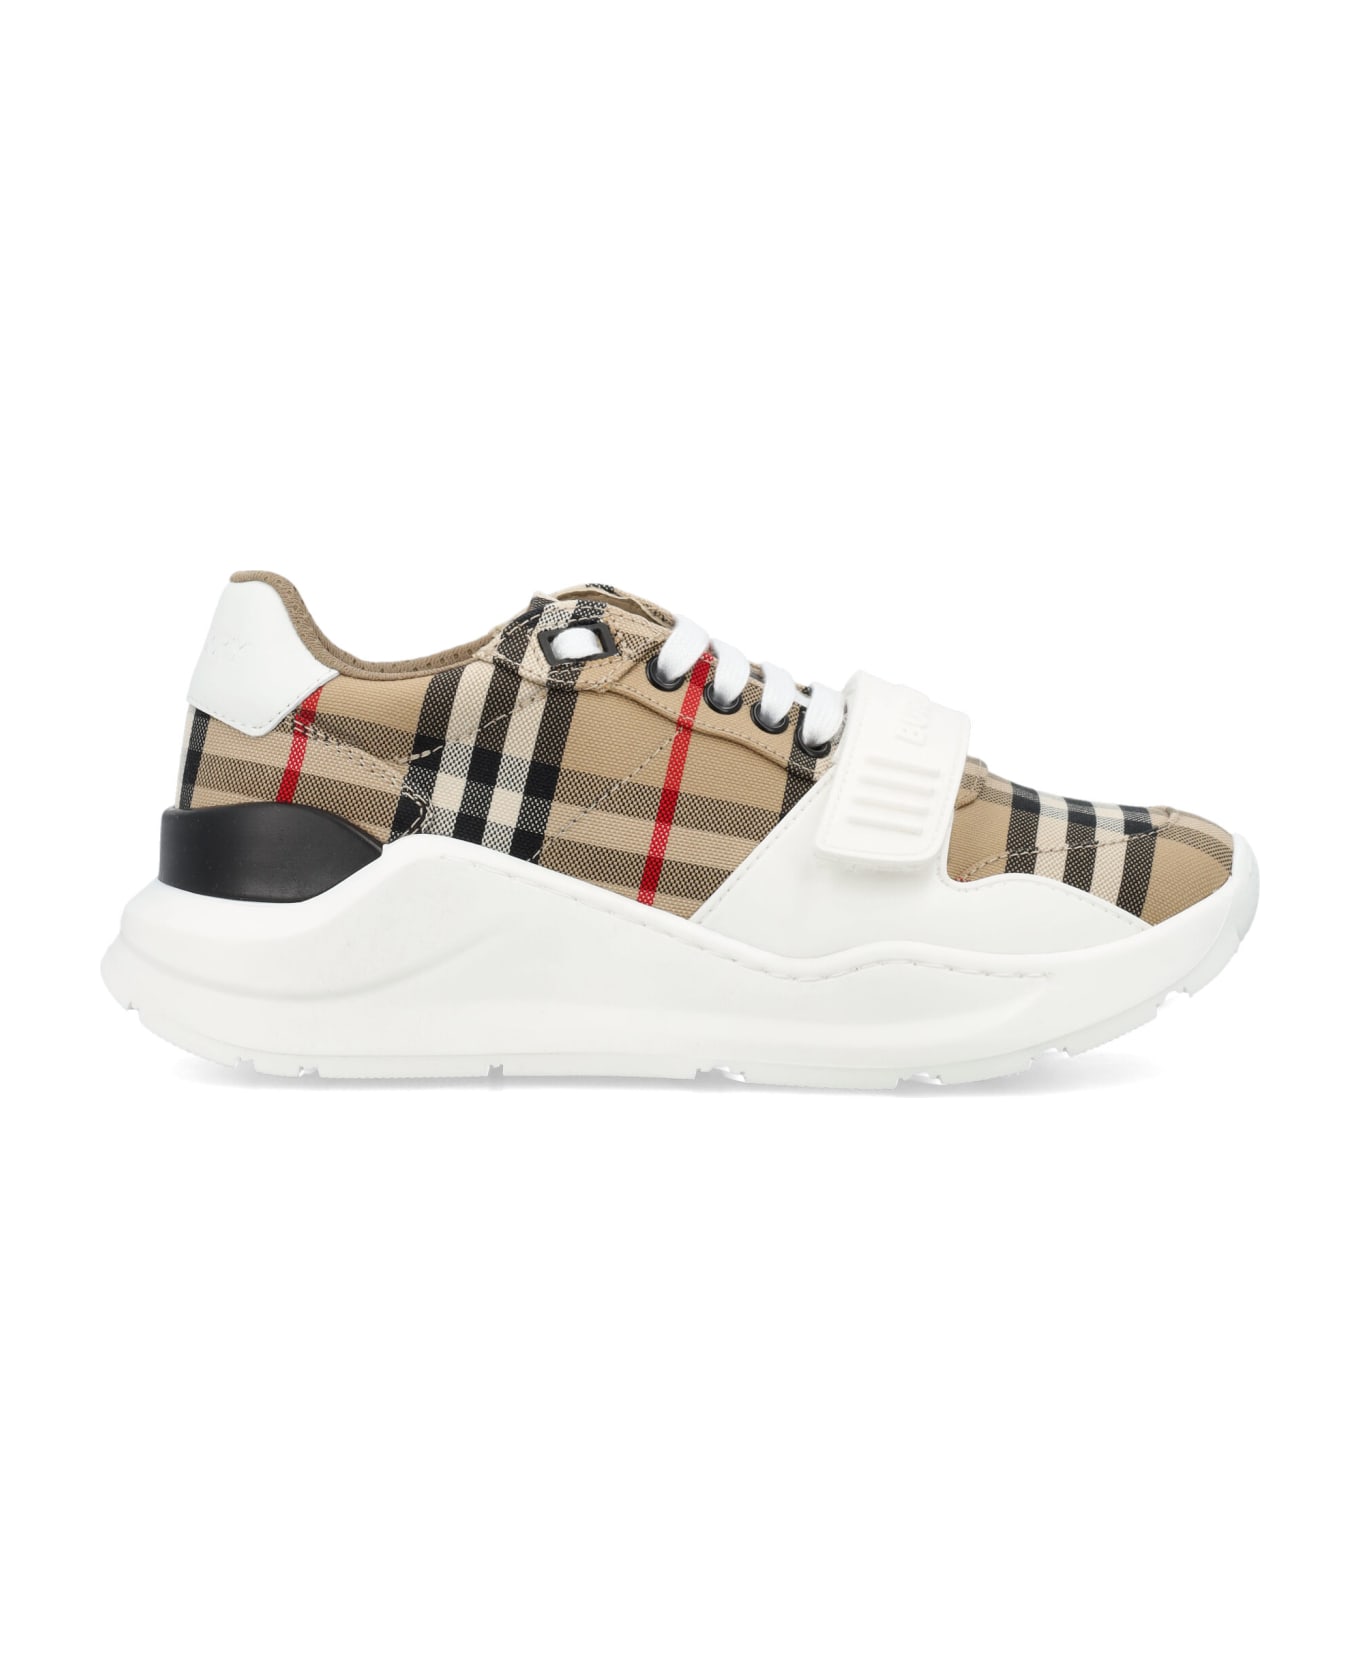 Burberry London Check Sneakers - ARCHIVE BEIGE IP CHK